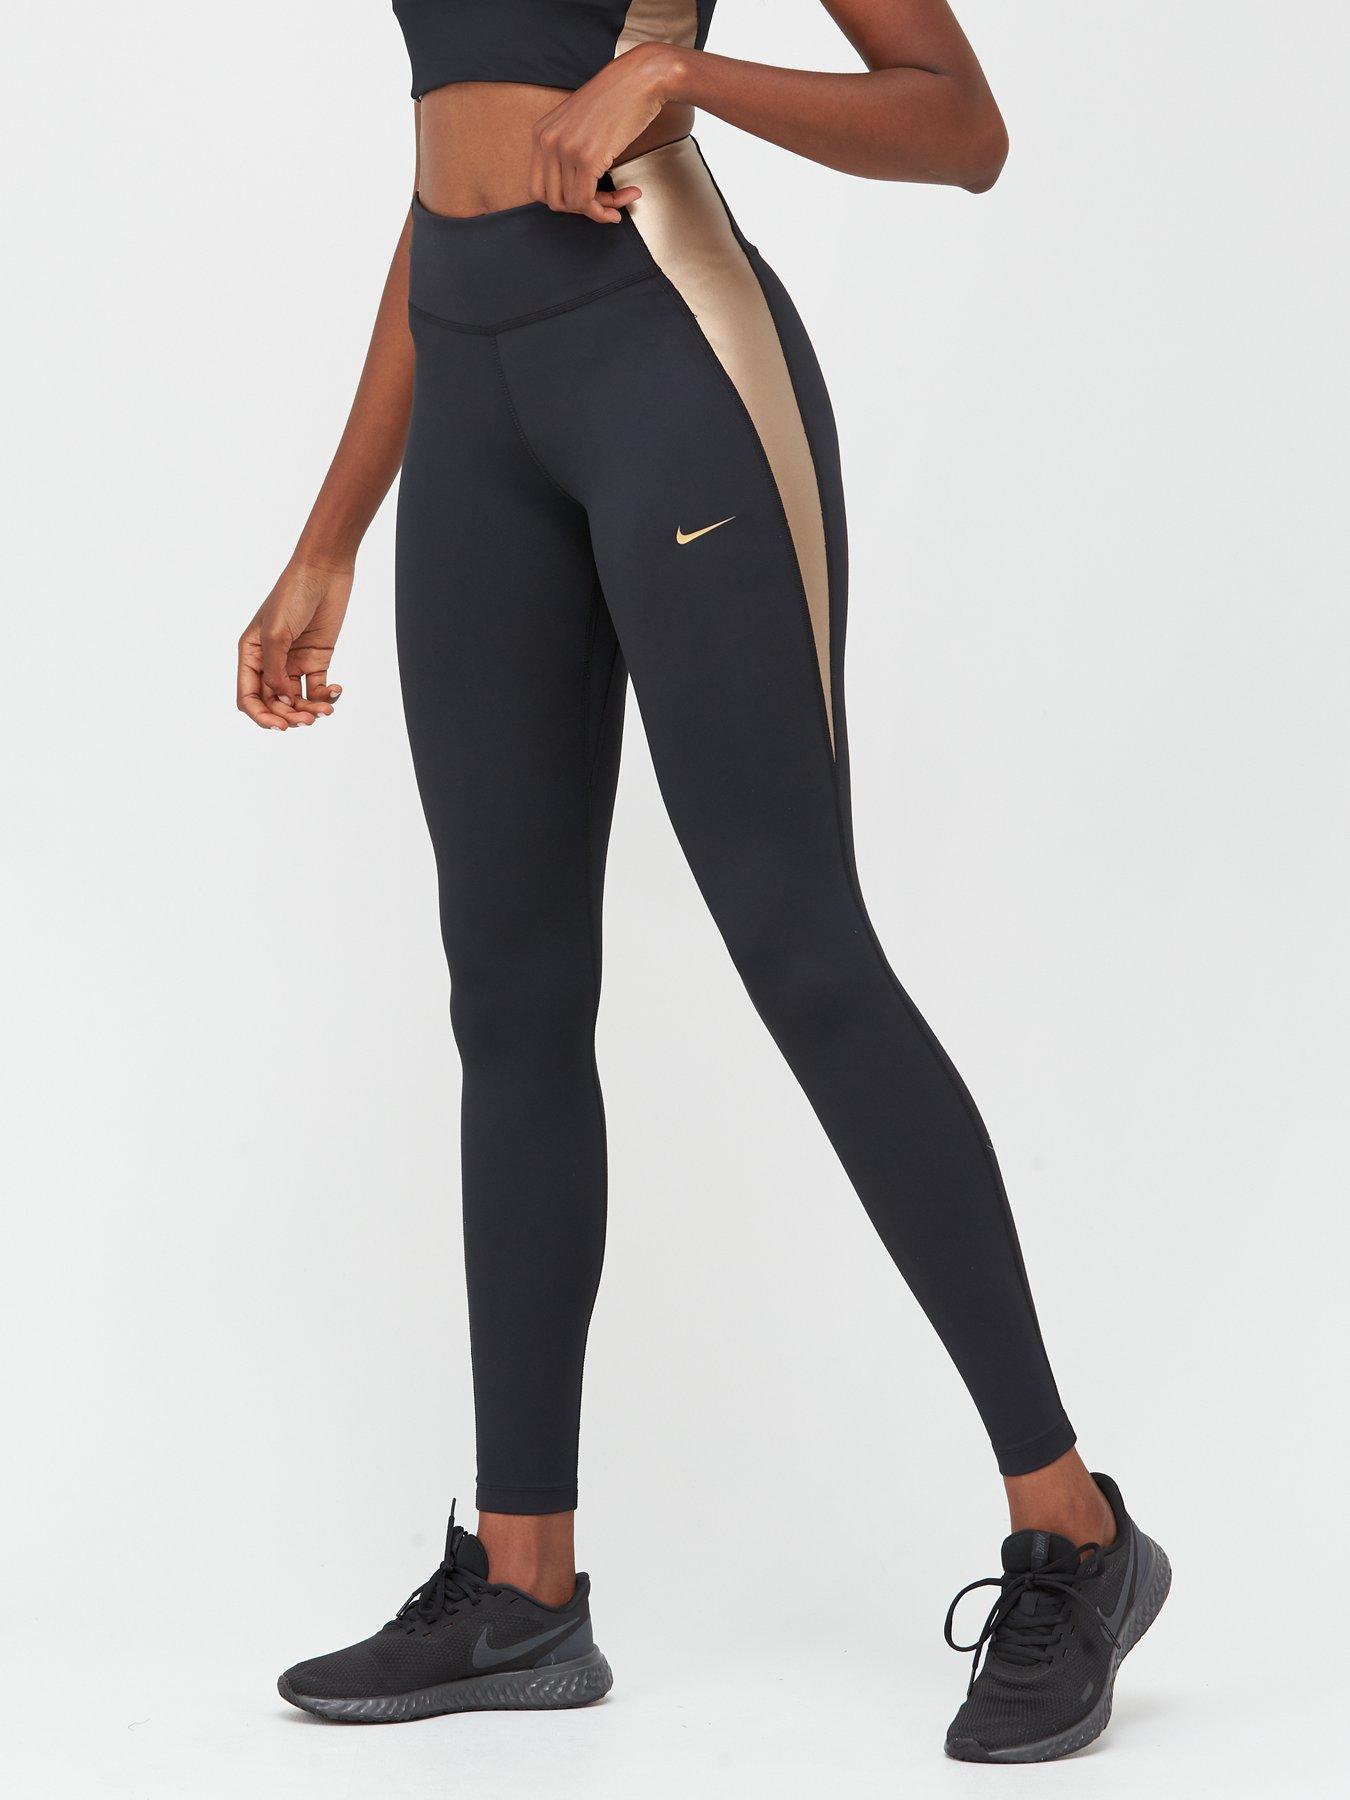 black and gold nike tights